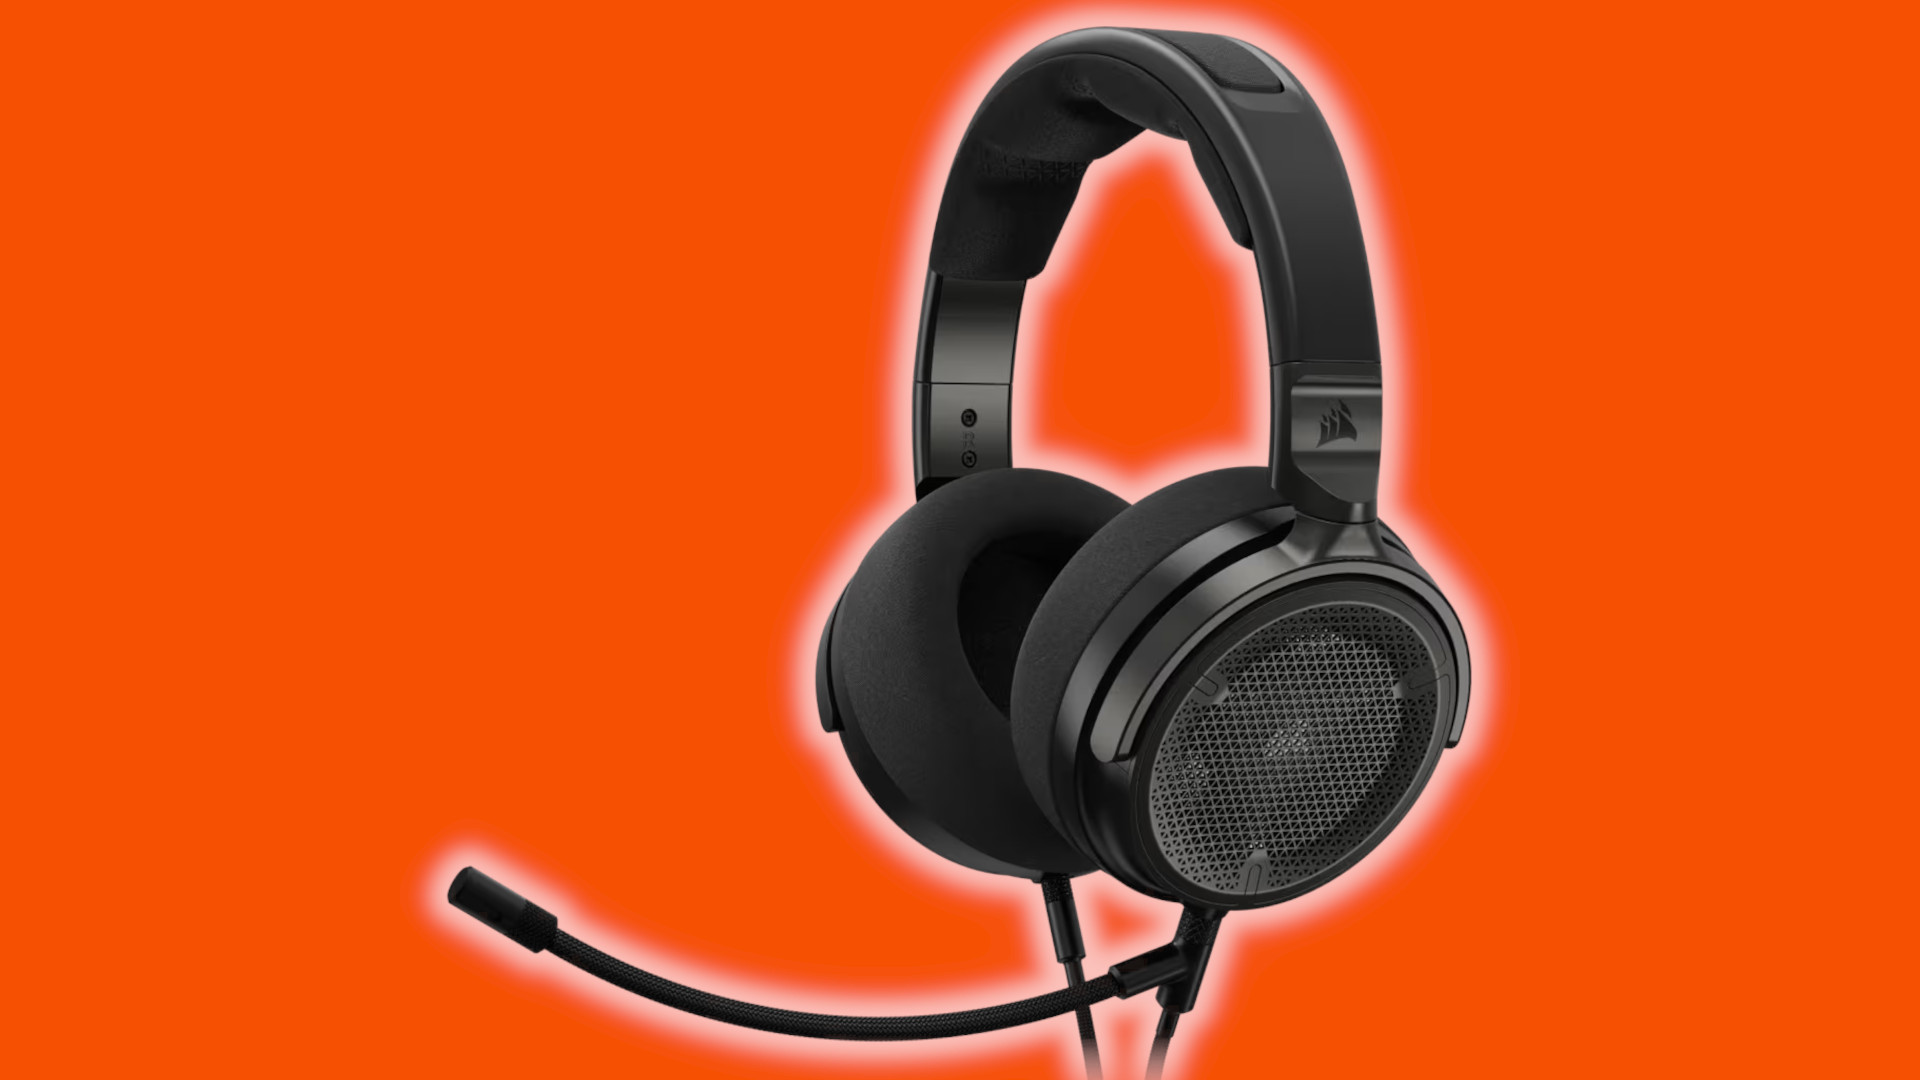 Get this open-back Corsair gaming headset at its lowest ever price